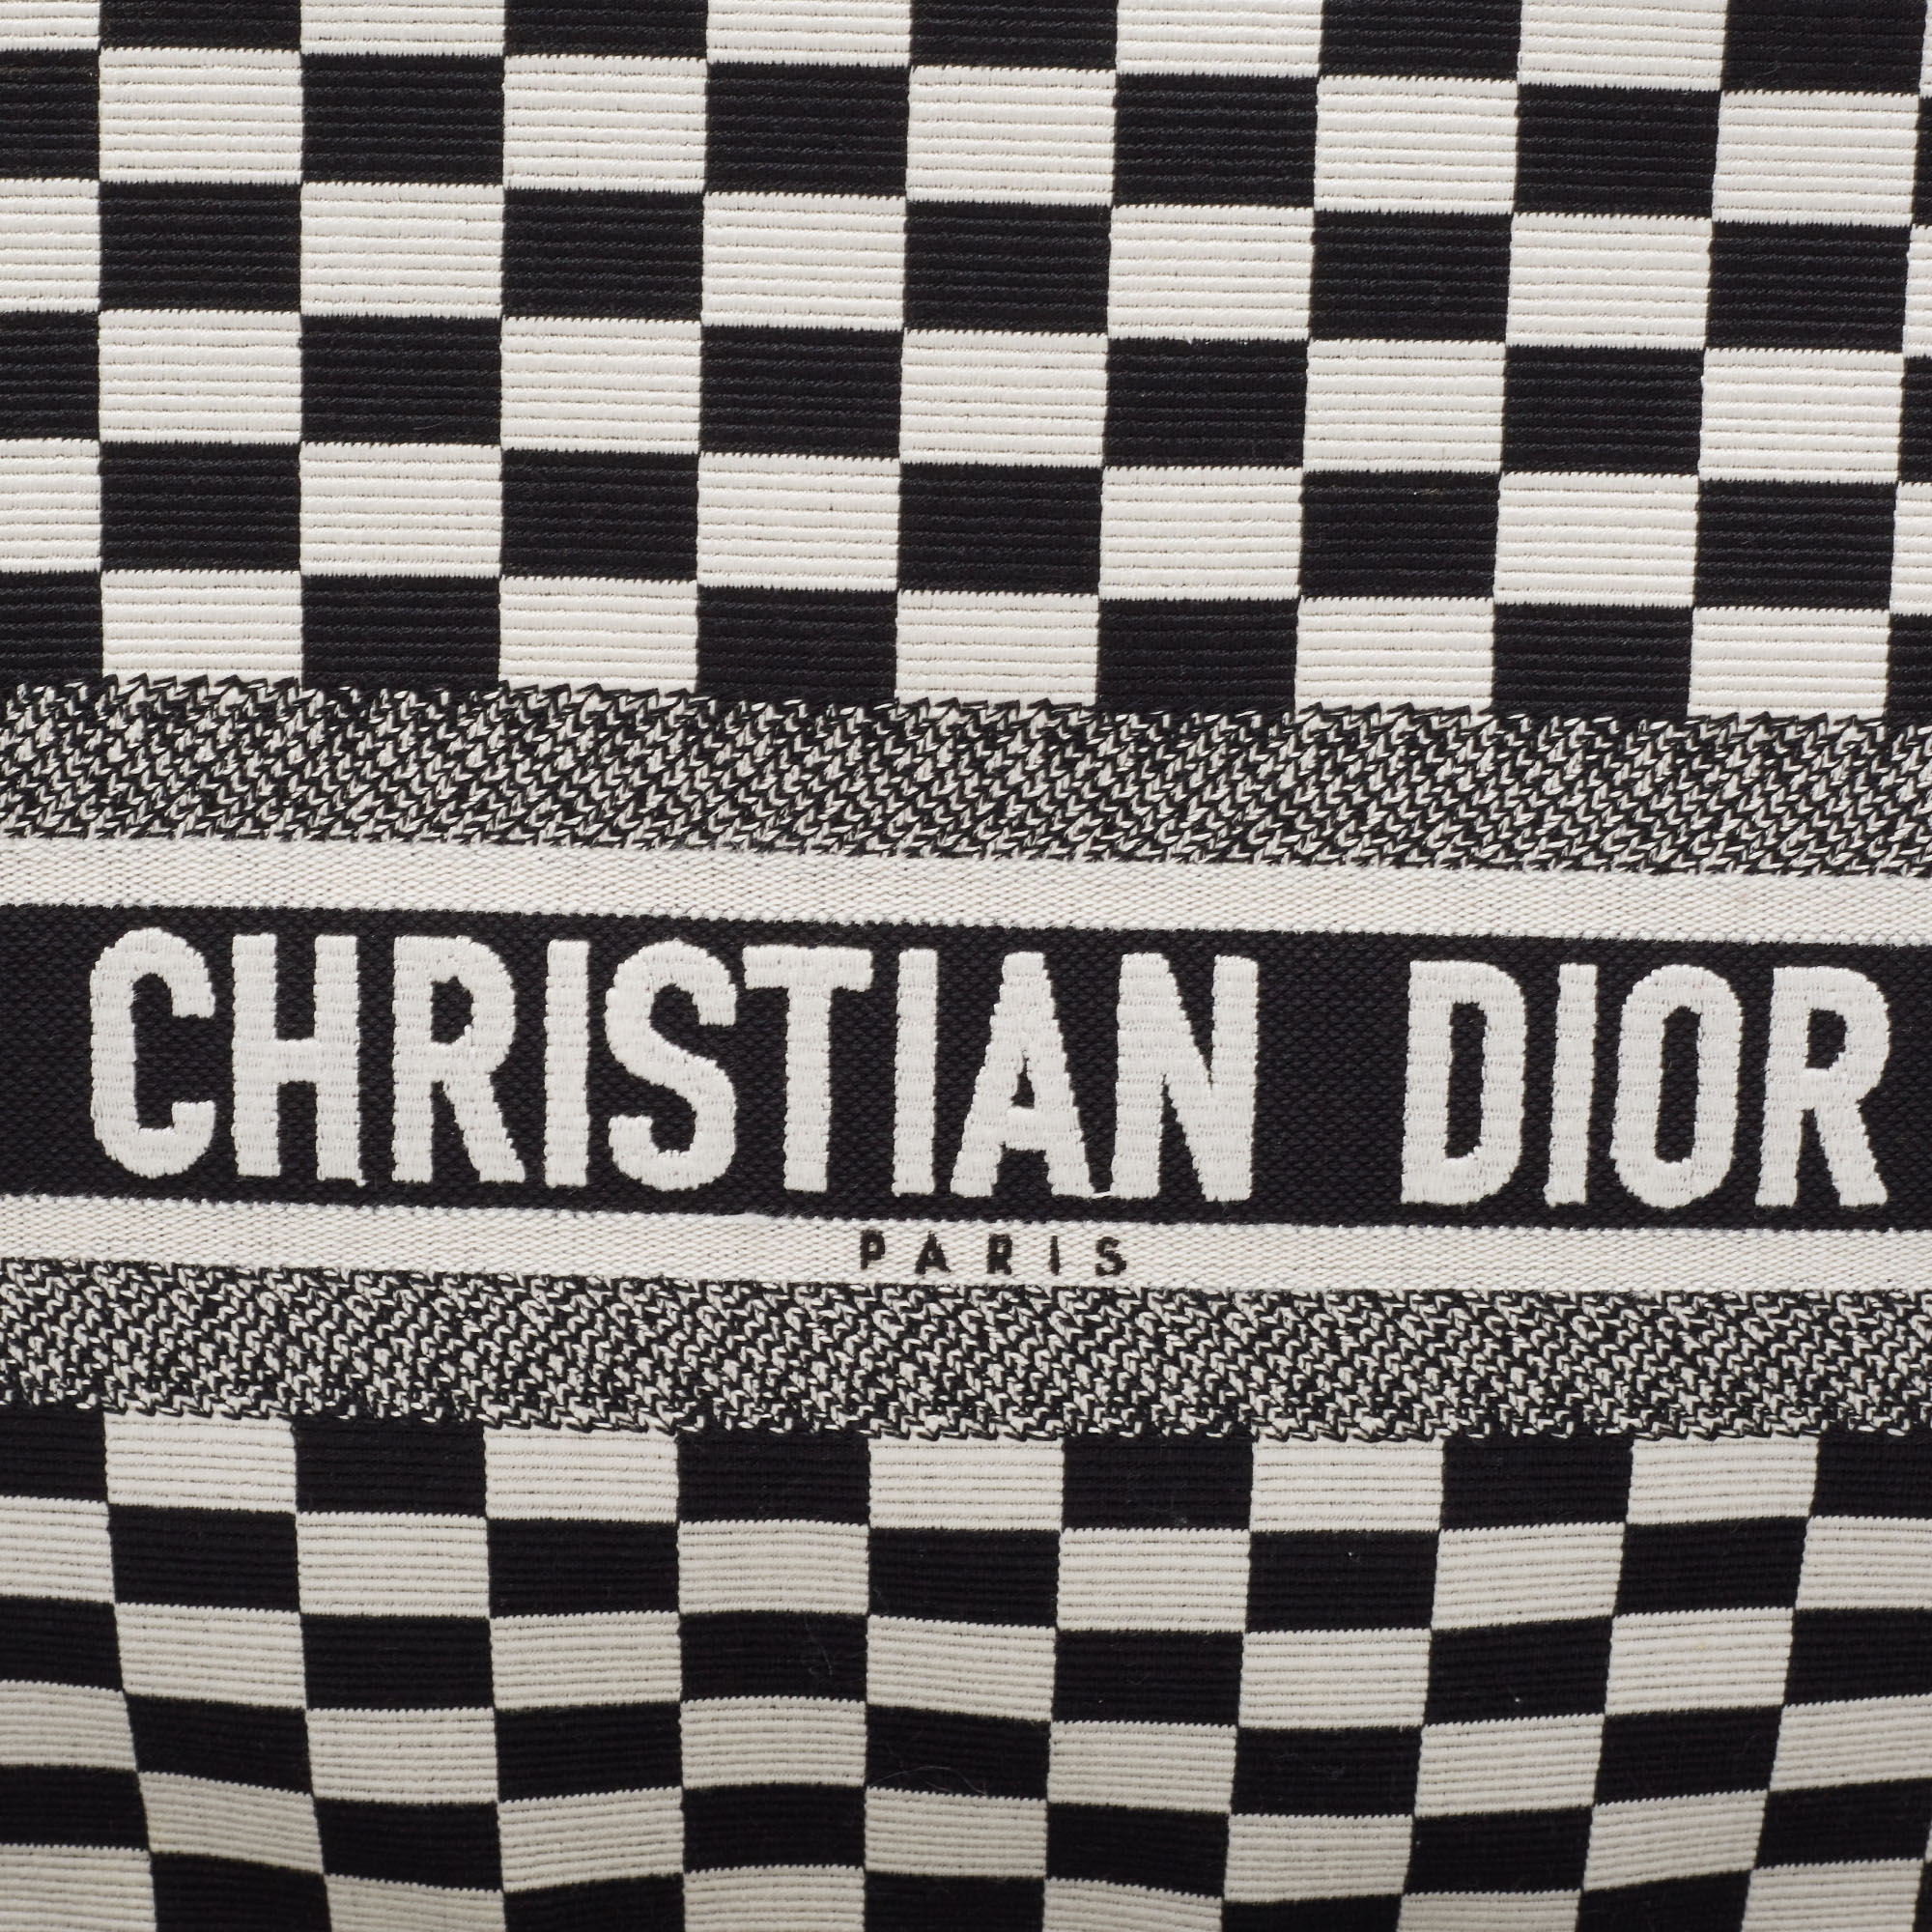 Dior Black/White Checkered Embroidered Canvas Large Book Tote